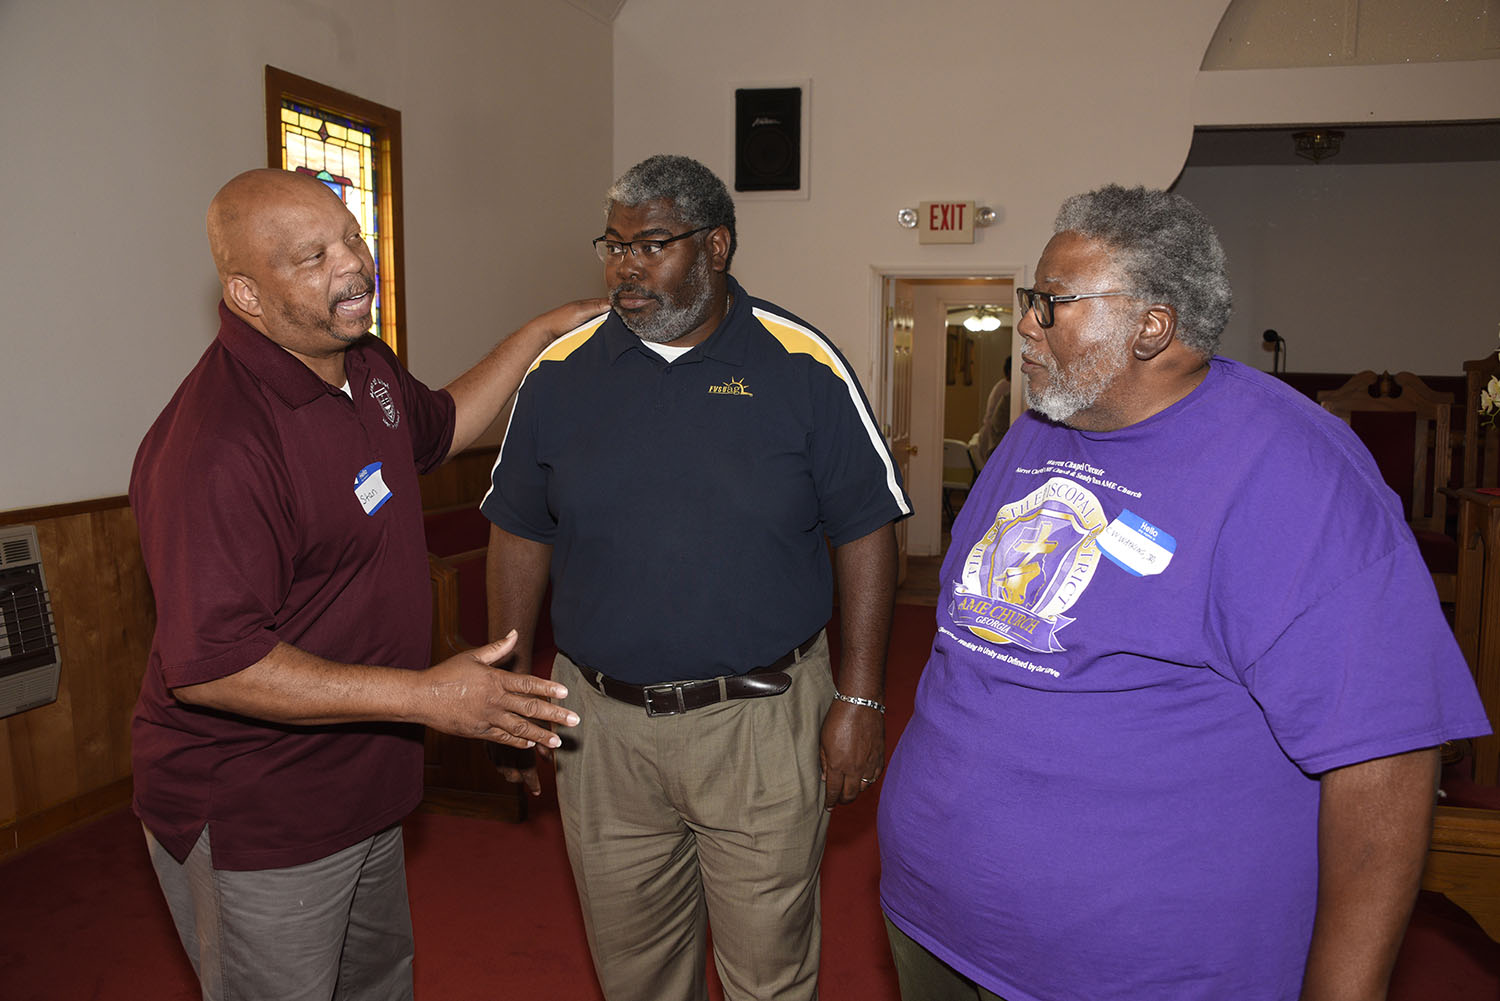 Marc Thomas (center), director of field operations for Fort Valley State University’s Cooperative Extension Program, listens to concerns voiced by Stan Smith (left) and C. W. Watkins (right) during the Managing Your Land for Profit Workshop in Sparta.